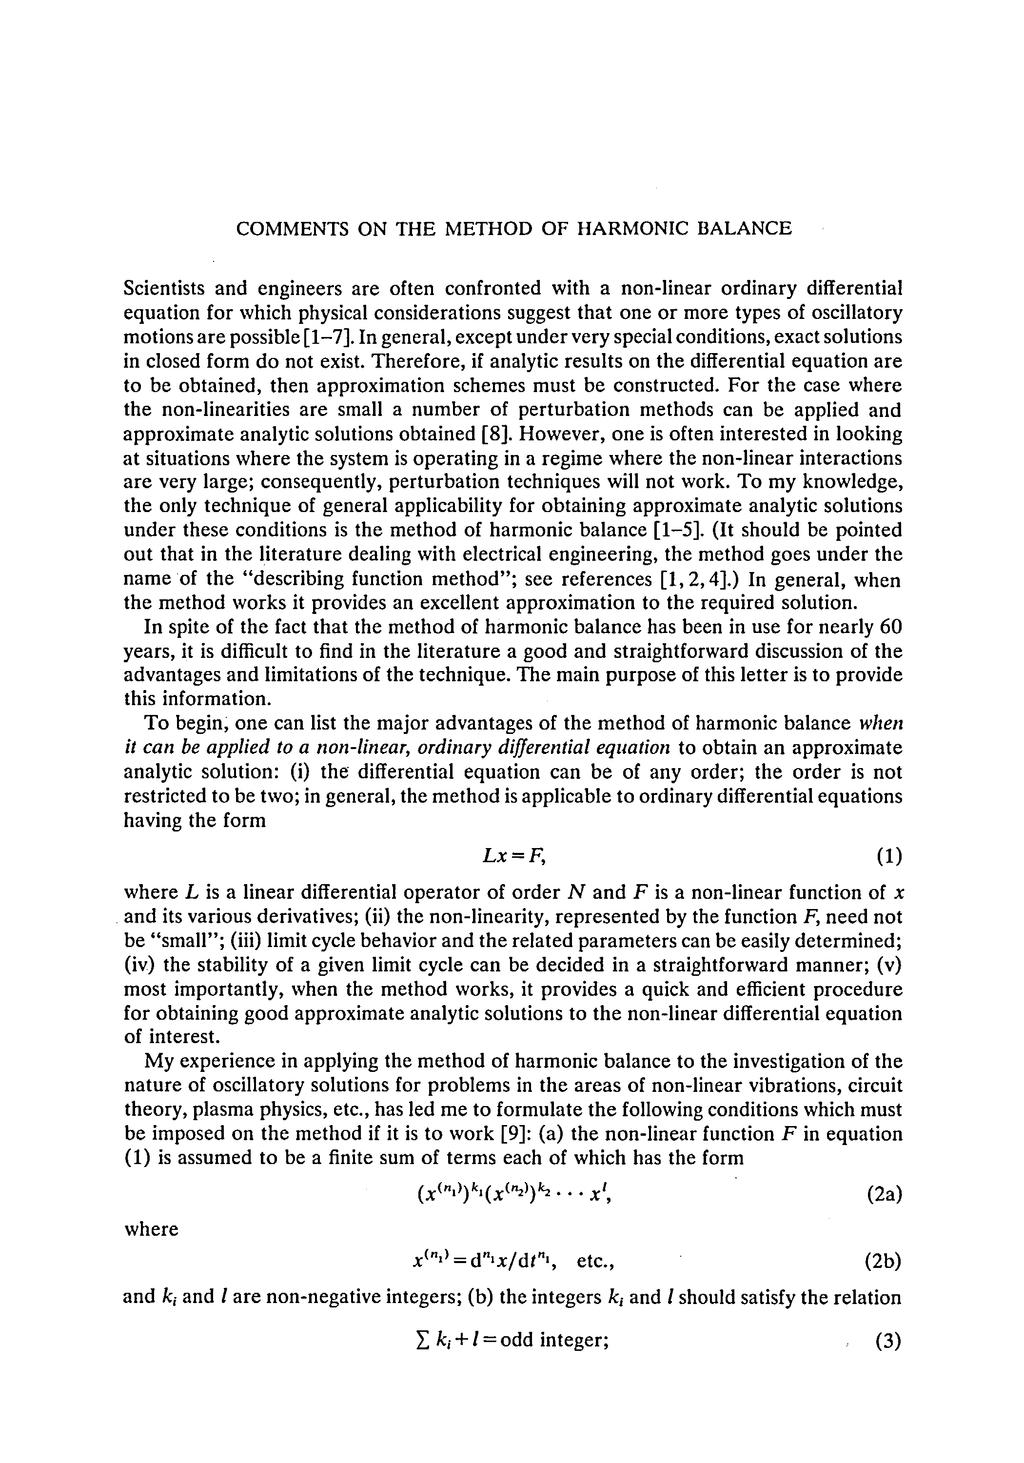 Journal of Sound and Vibration (1984) 94(3), 456-460 COMMENTS ON THE METHOD OF HARMONIC BALANCE Scientists and engineers are often confronted with a non-linear ordinary differential equation for